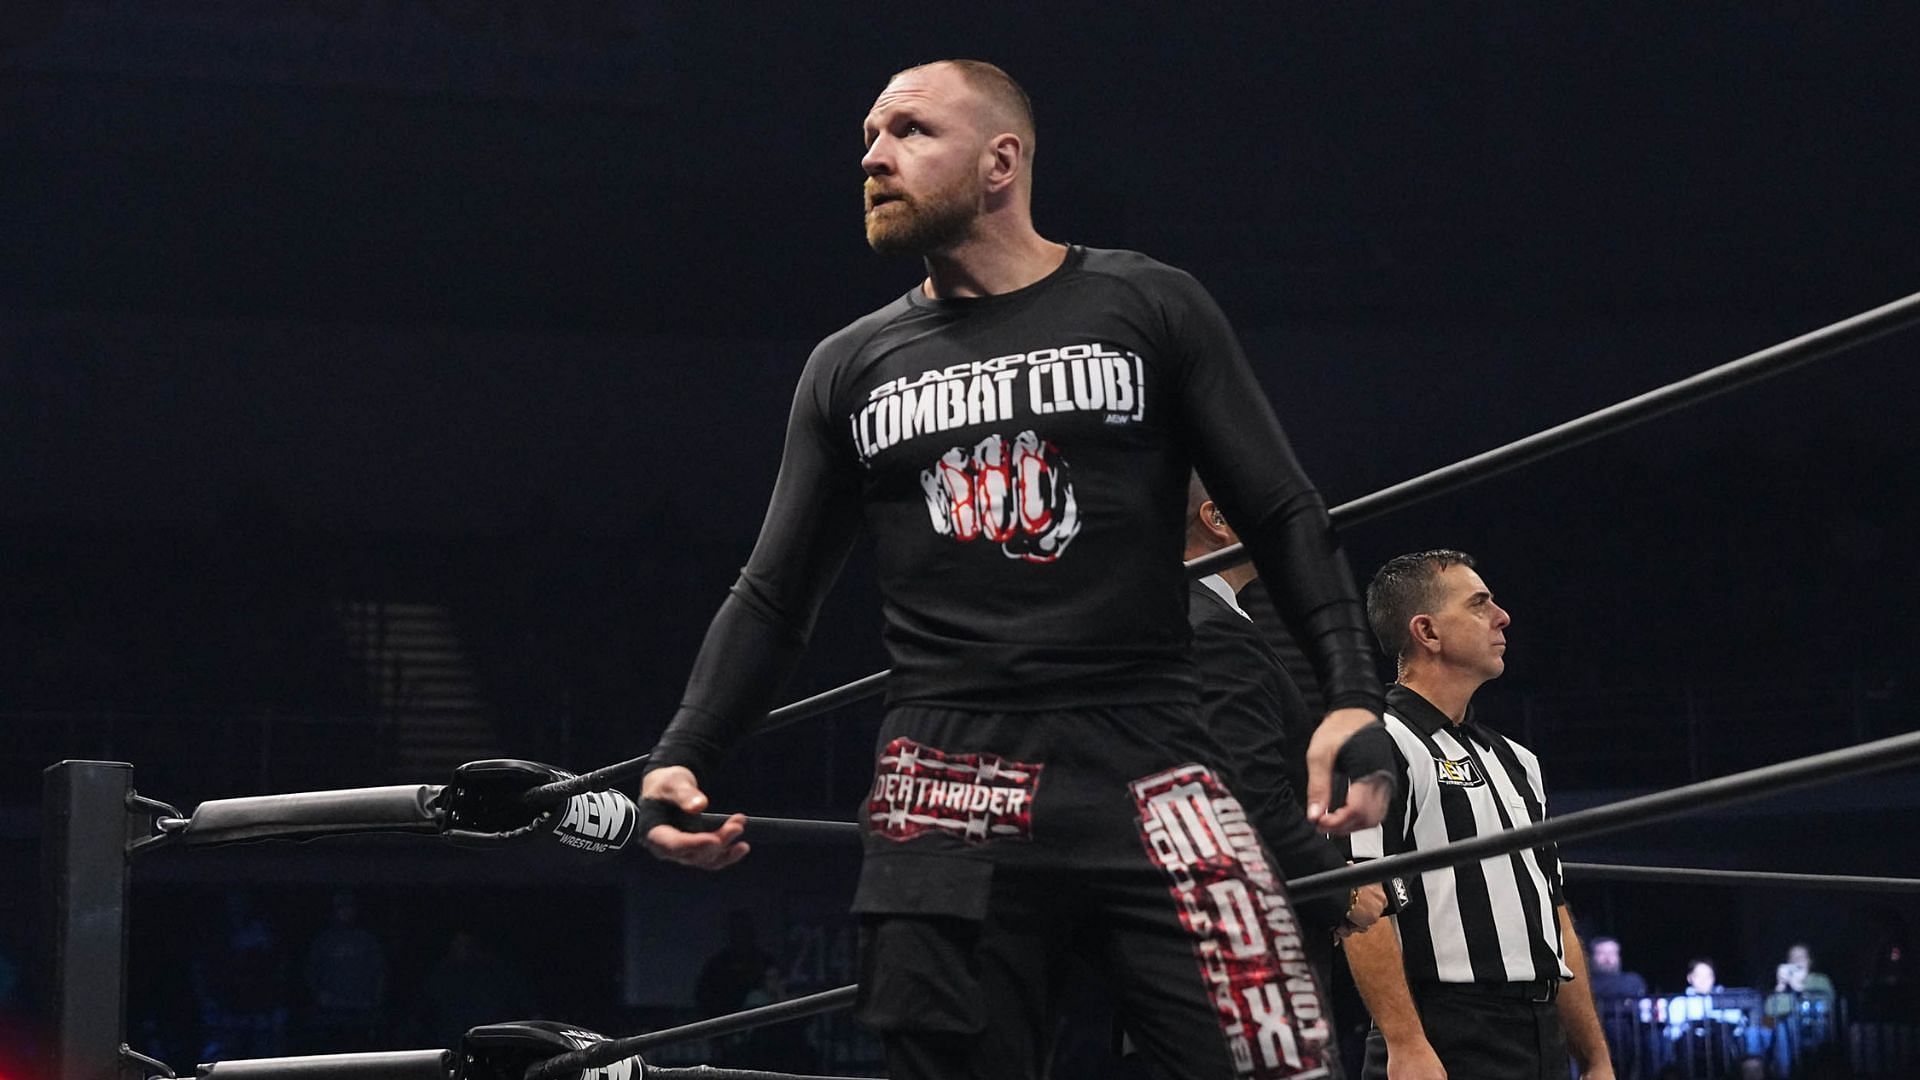 Jon Moxley is a former AEW World Champion and a member of the Blackpool Combat Club [Photo courtesy of AEW Official Website]